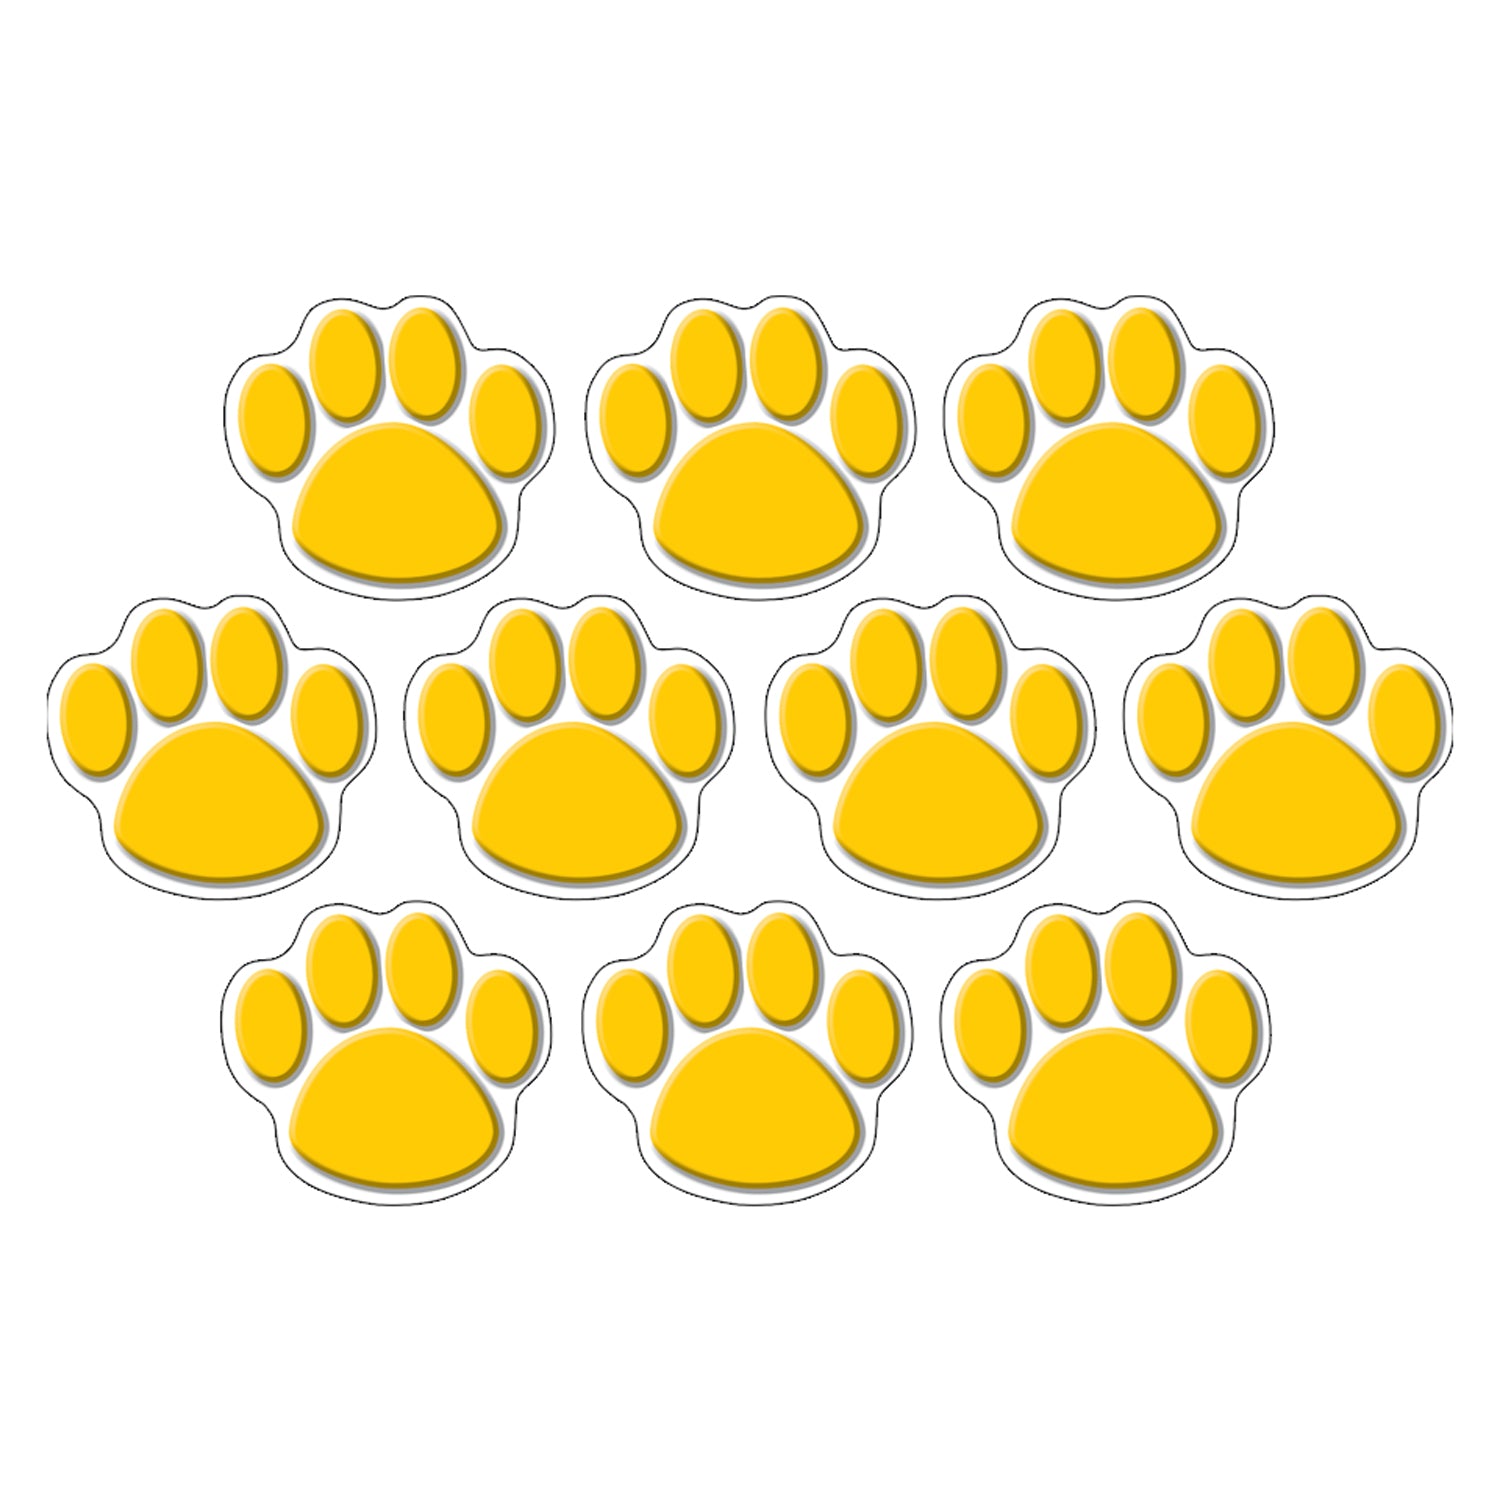 Gold Paw Prints Accents, 30 Per Packs, 3 Packs